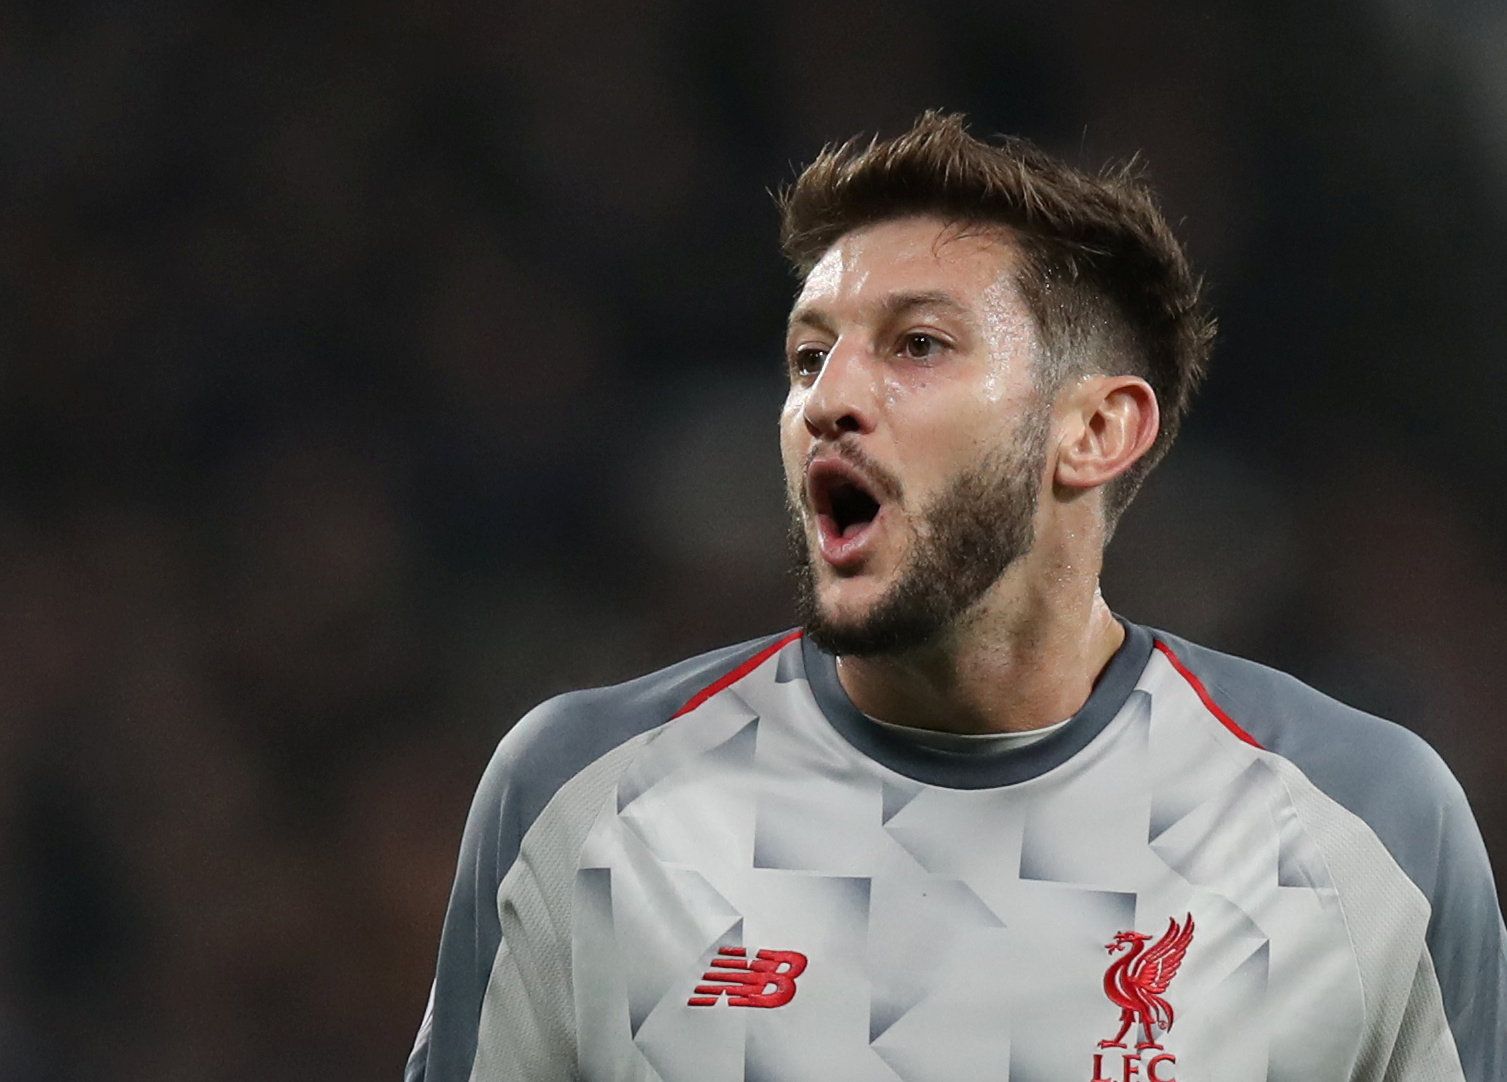 Soccer Football - Premier League - West Ham United v Liverpool - London Stadium, London, Britain - February 4, 2019  Liverpool's Adam Lallana during the match          REUTERS/David Klein  EDITORIAL USE ONLY. No use with unauthorized audio, video, data, fixture lists, club/league logos or 